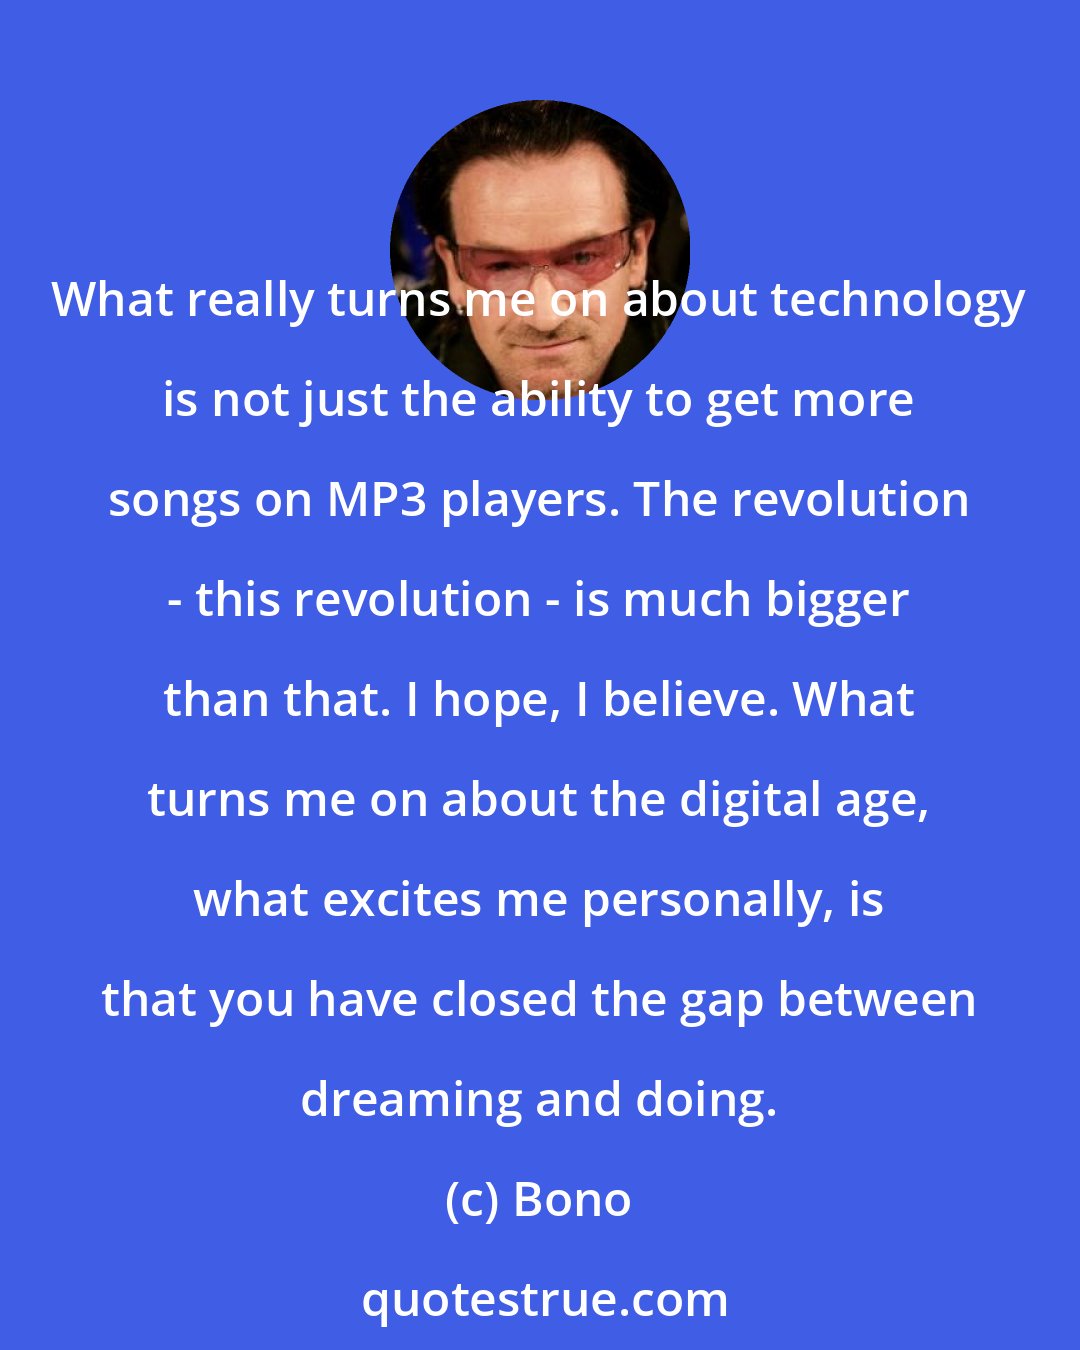 Bono: What really turns me on about technology is not just the ability to get more songs on MP3 players. The revolution - this revolution - is much bigger than that. I hope, I believe. What turns me on about the digital age, what excites me personally, is that you have closed the gap between dreaming and doing.